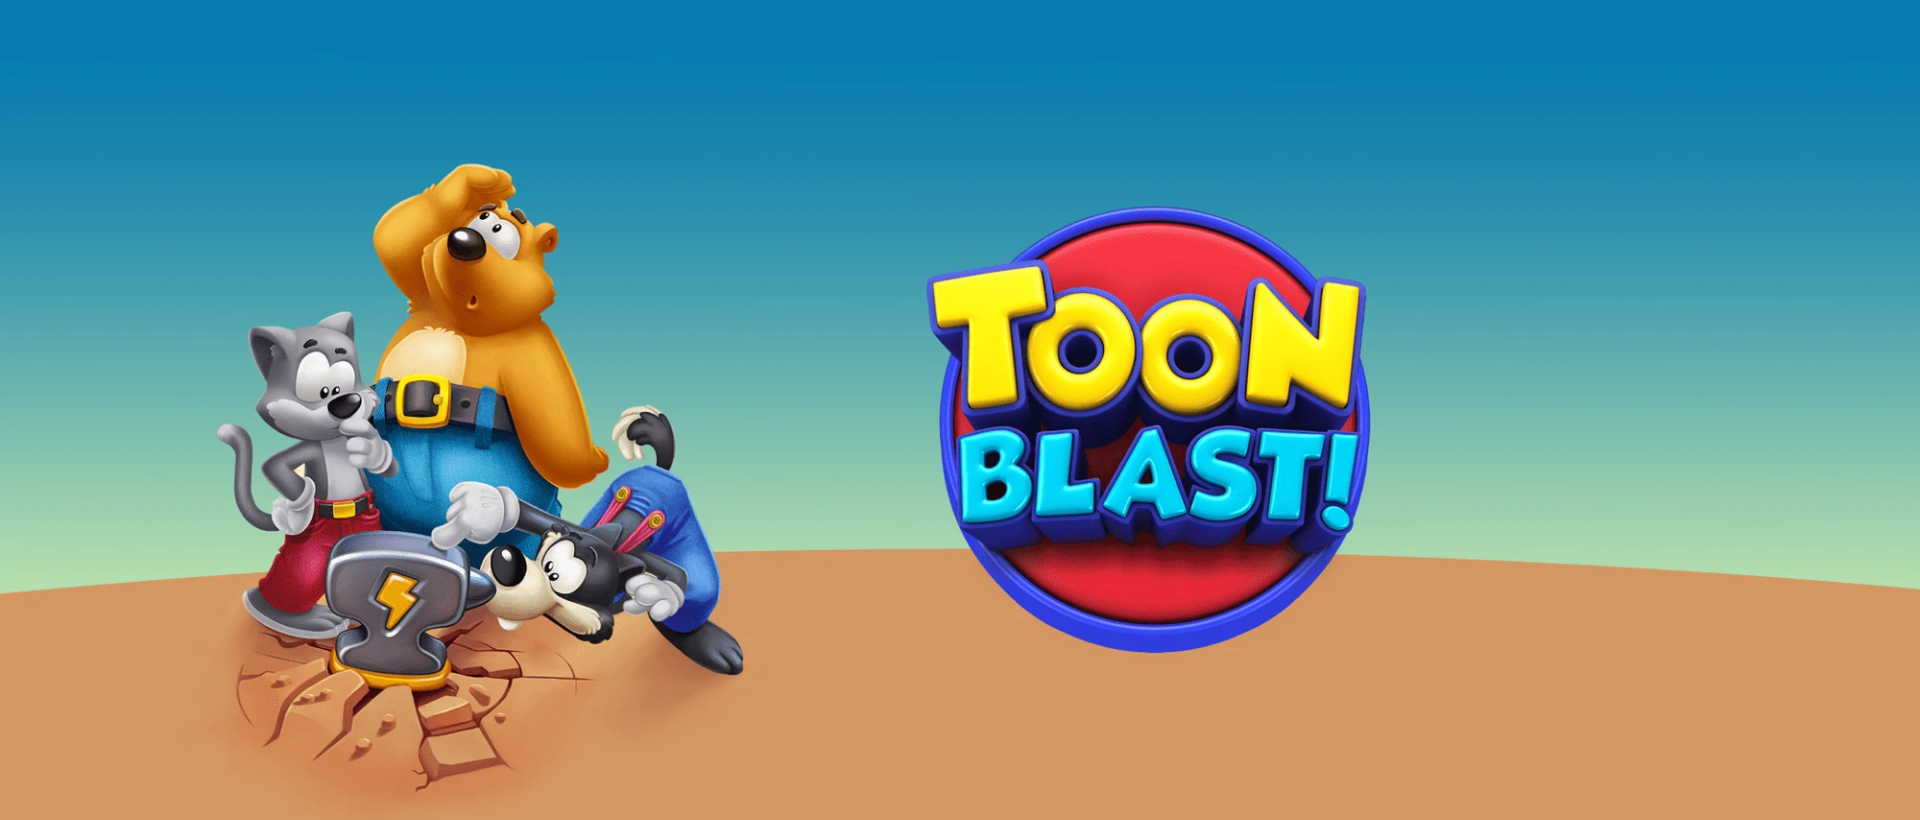 Download & Play Toon Blast on PC & Mac with NoxPlayer (Emulator)